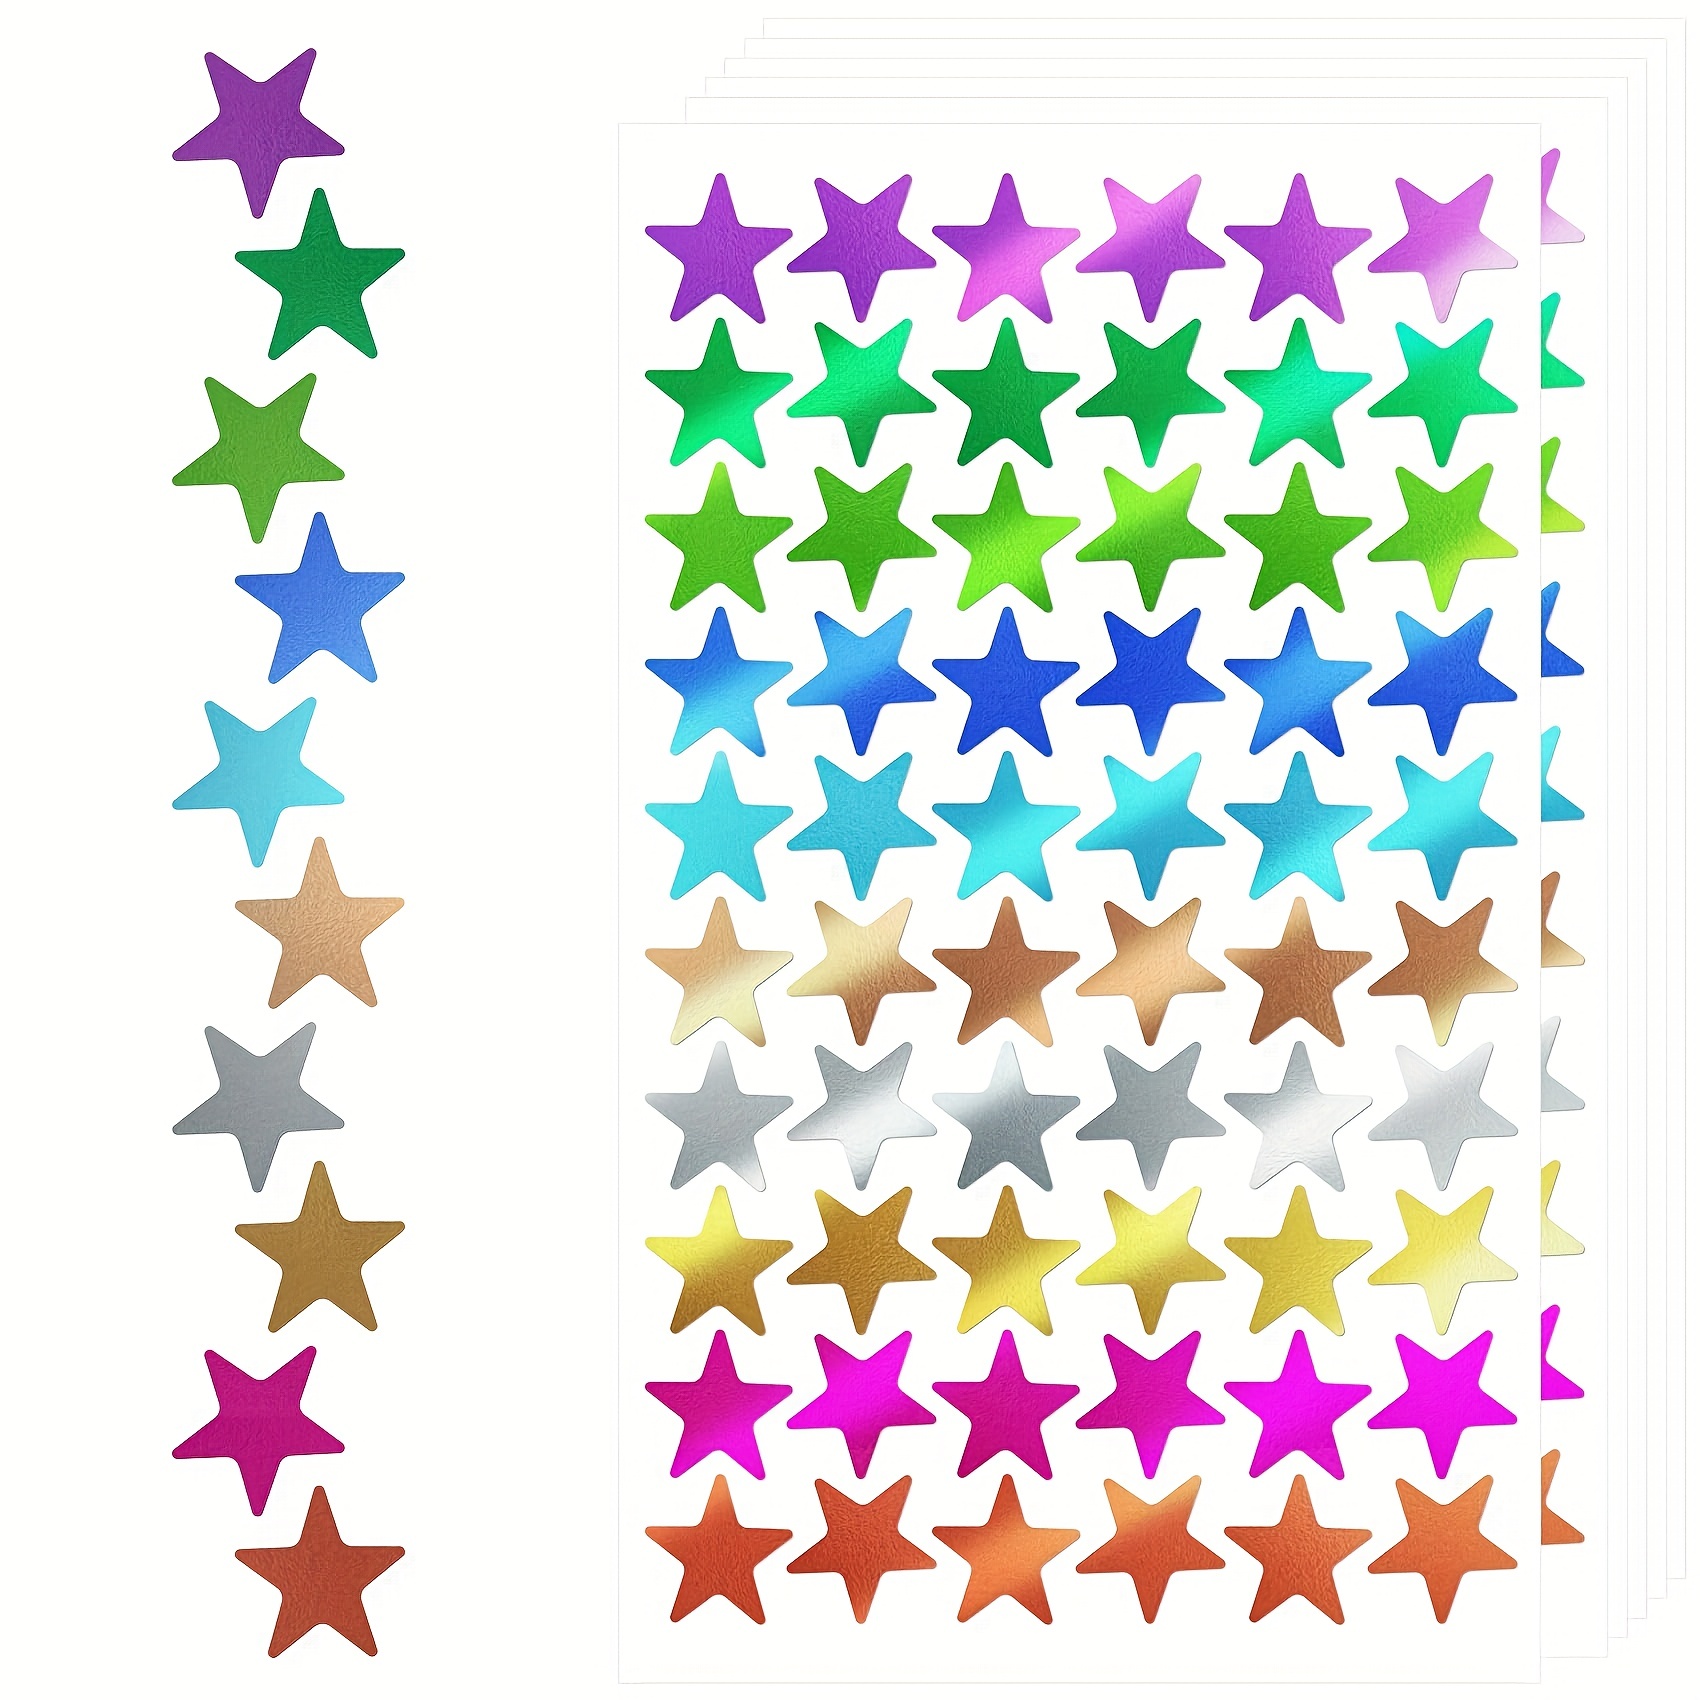 1200pcs Holographic Star Stickers, Rainbow Stickers Teacher Stickers For  Students Reward, Small Foil Star Stickers, Glitter Star Stickers For